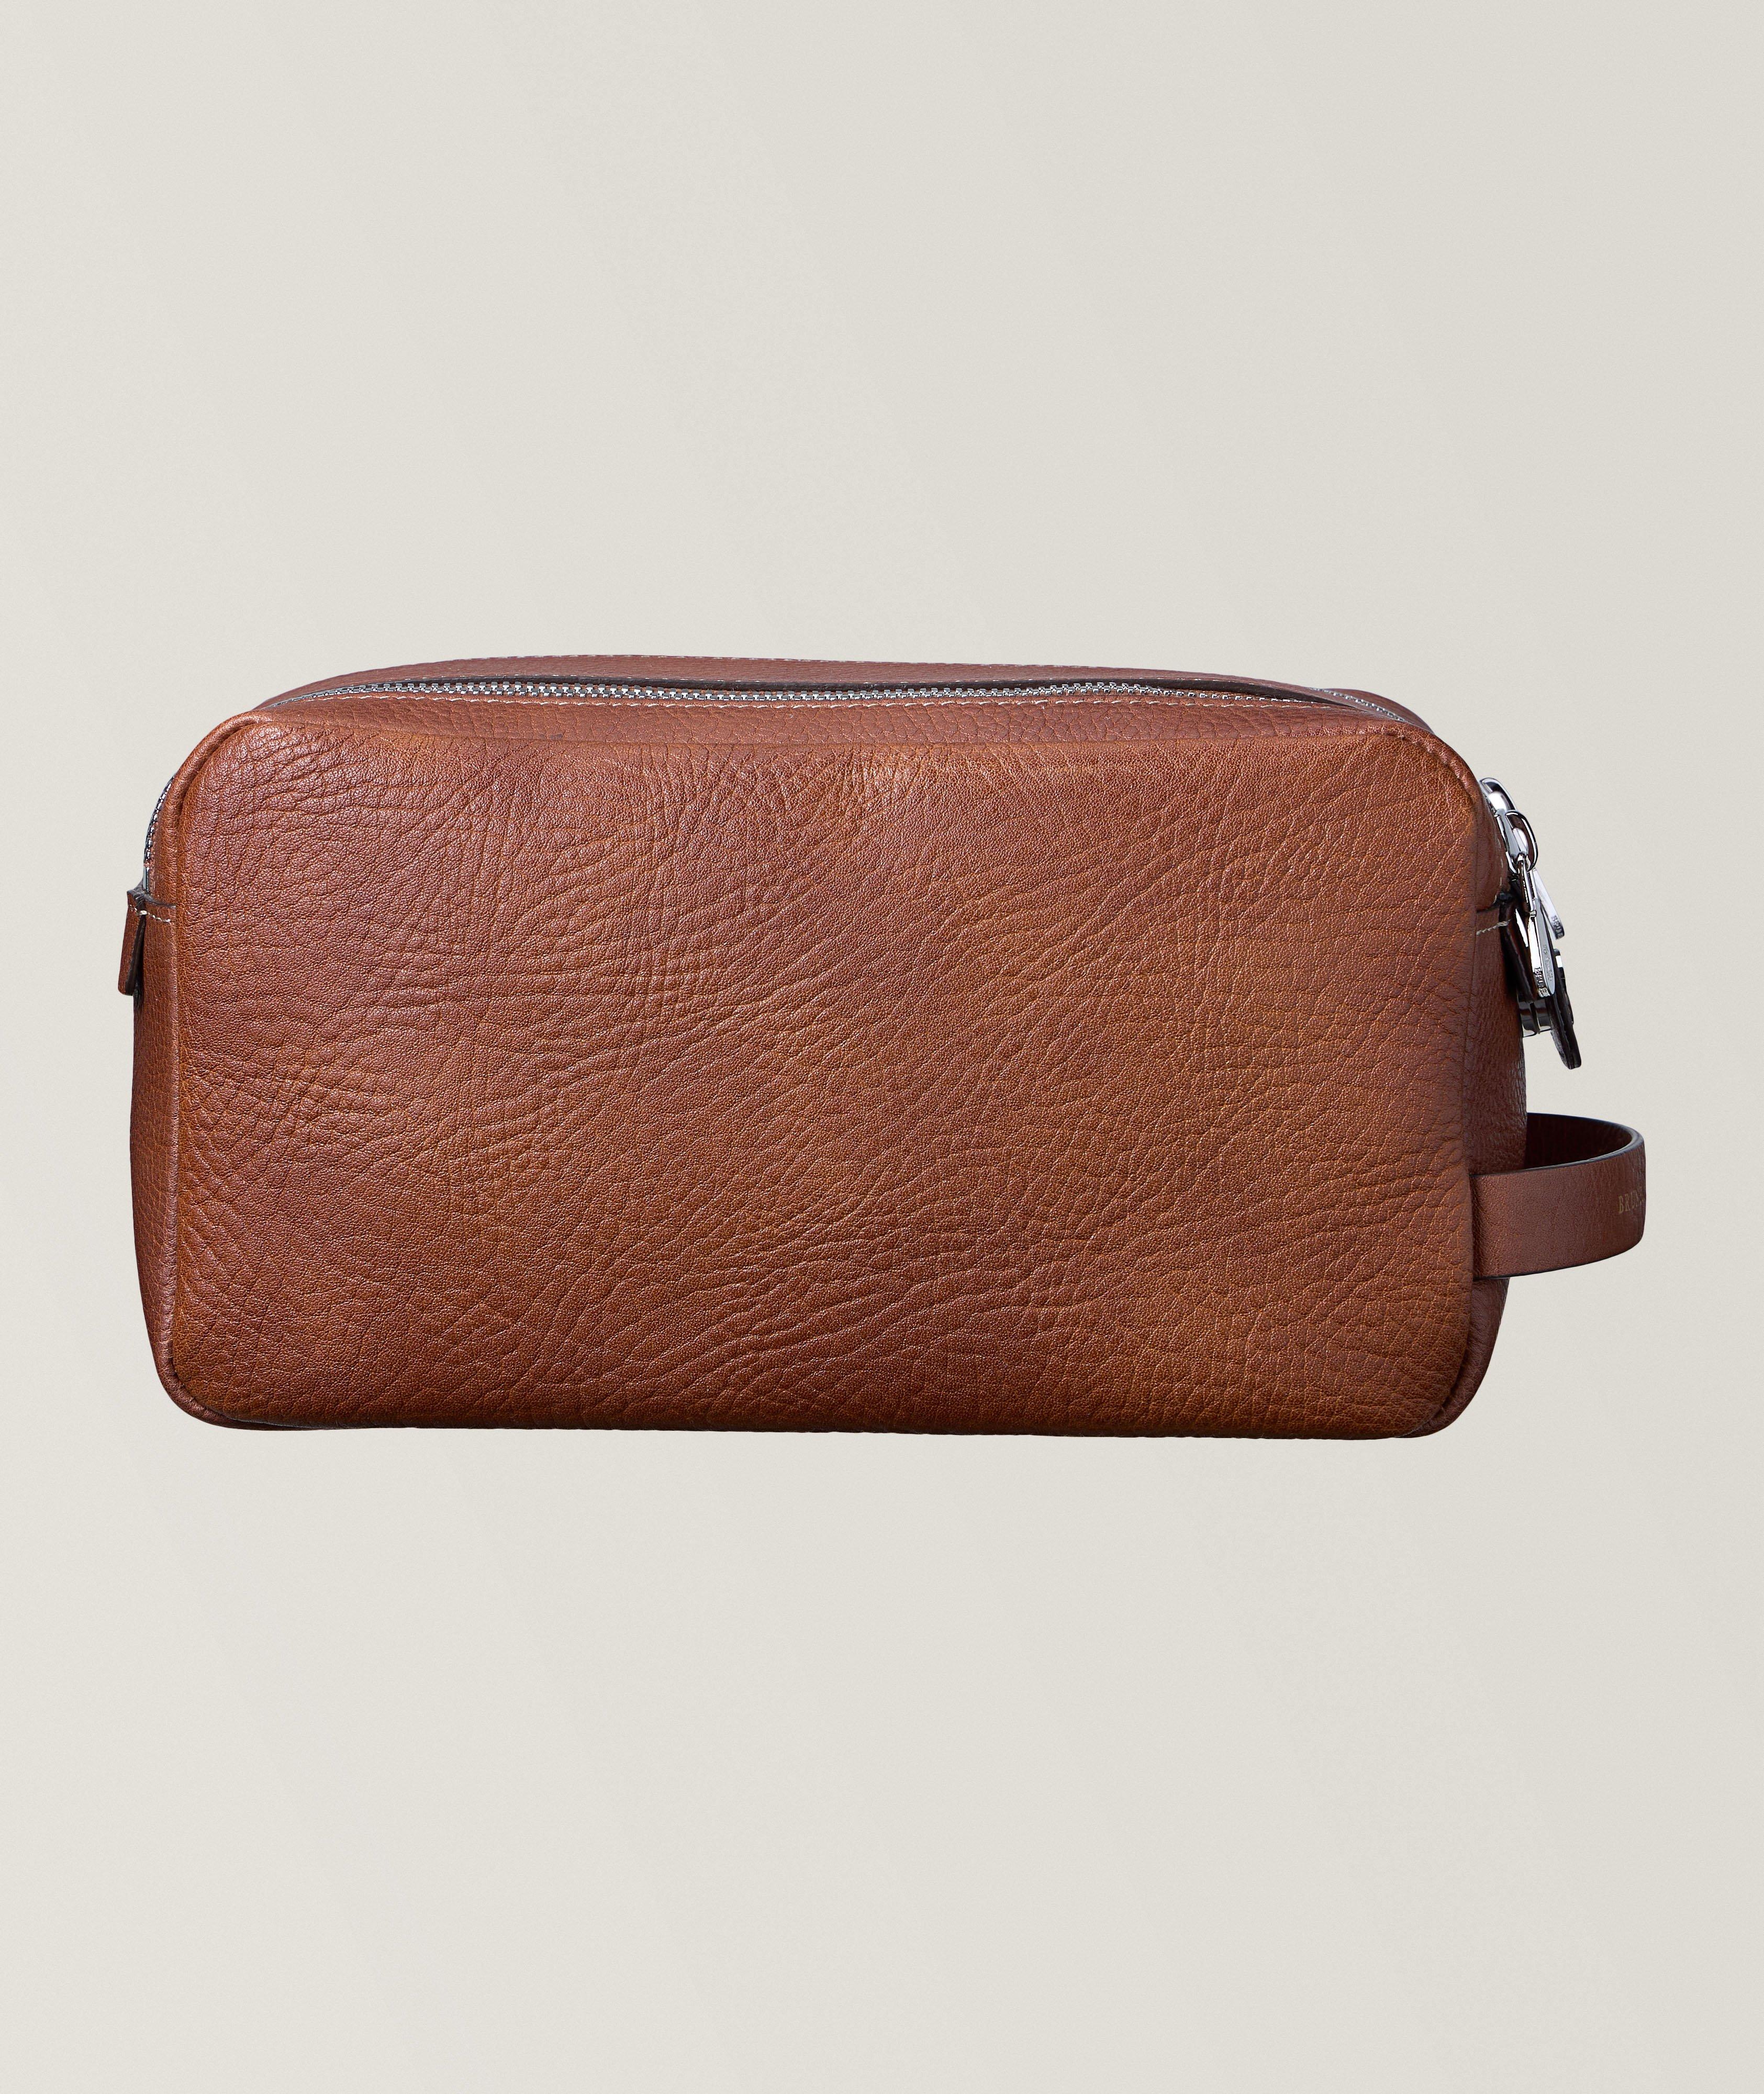 Grain Leather Toiletry Bag image 1